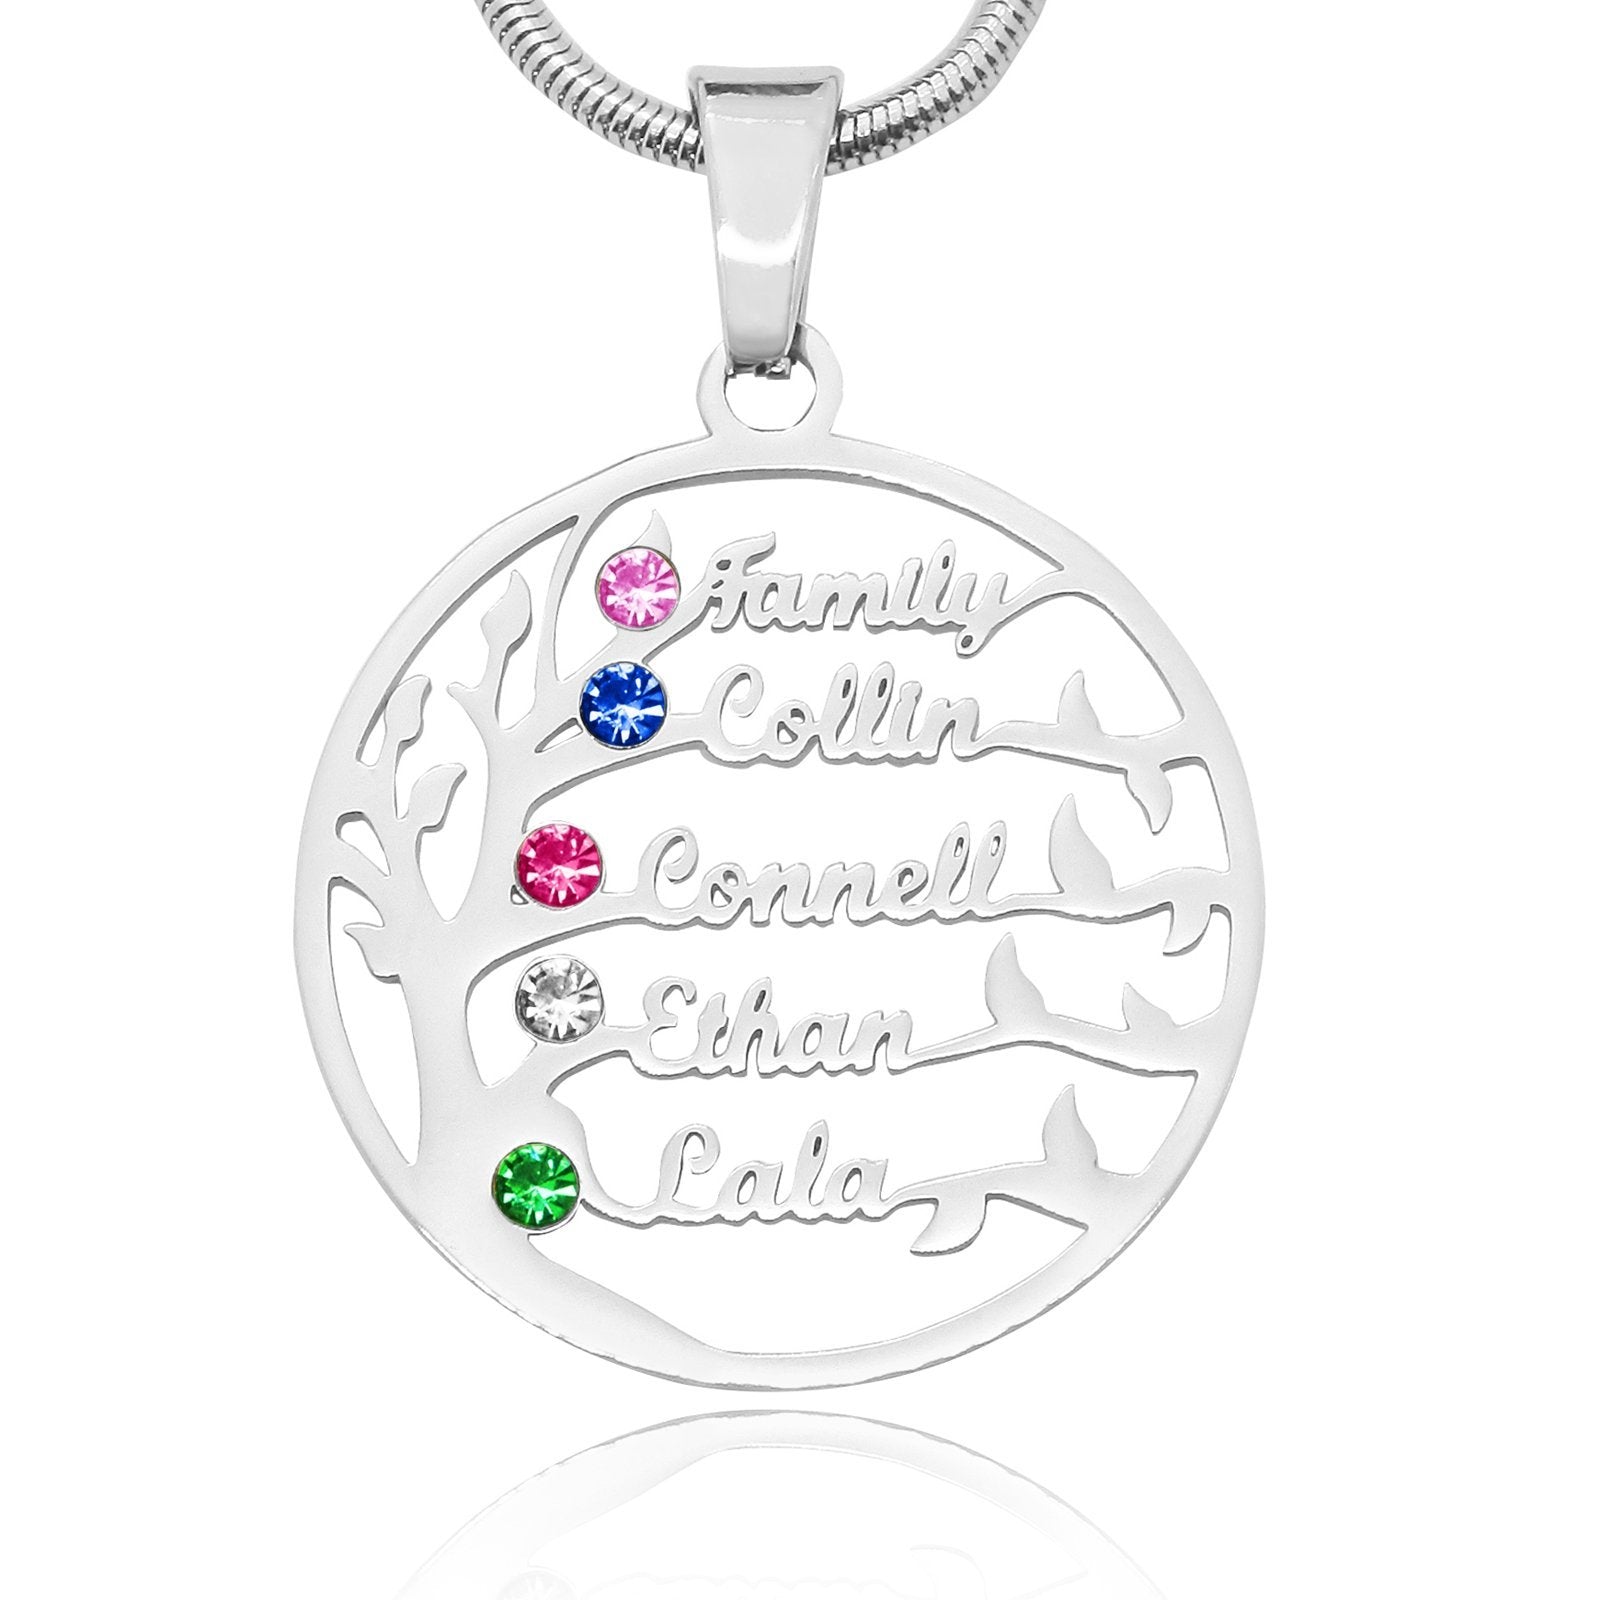 Family Tree Name Necklace (Birthstones Optional) - Family Tree Necklaces by Belle Fever